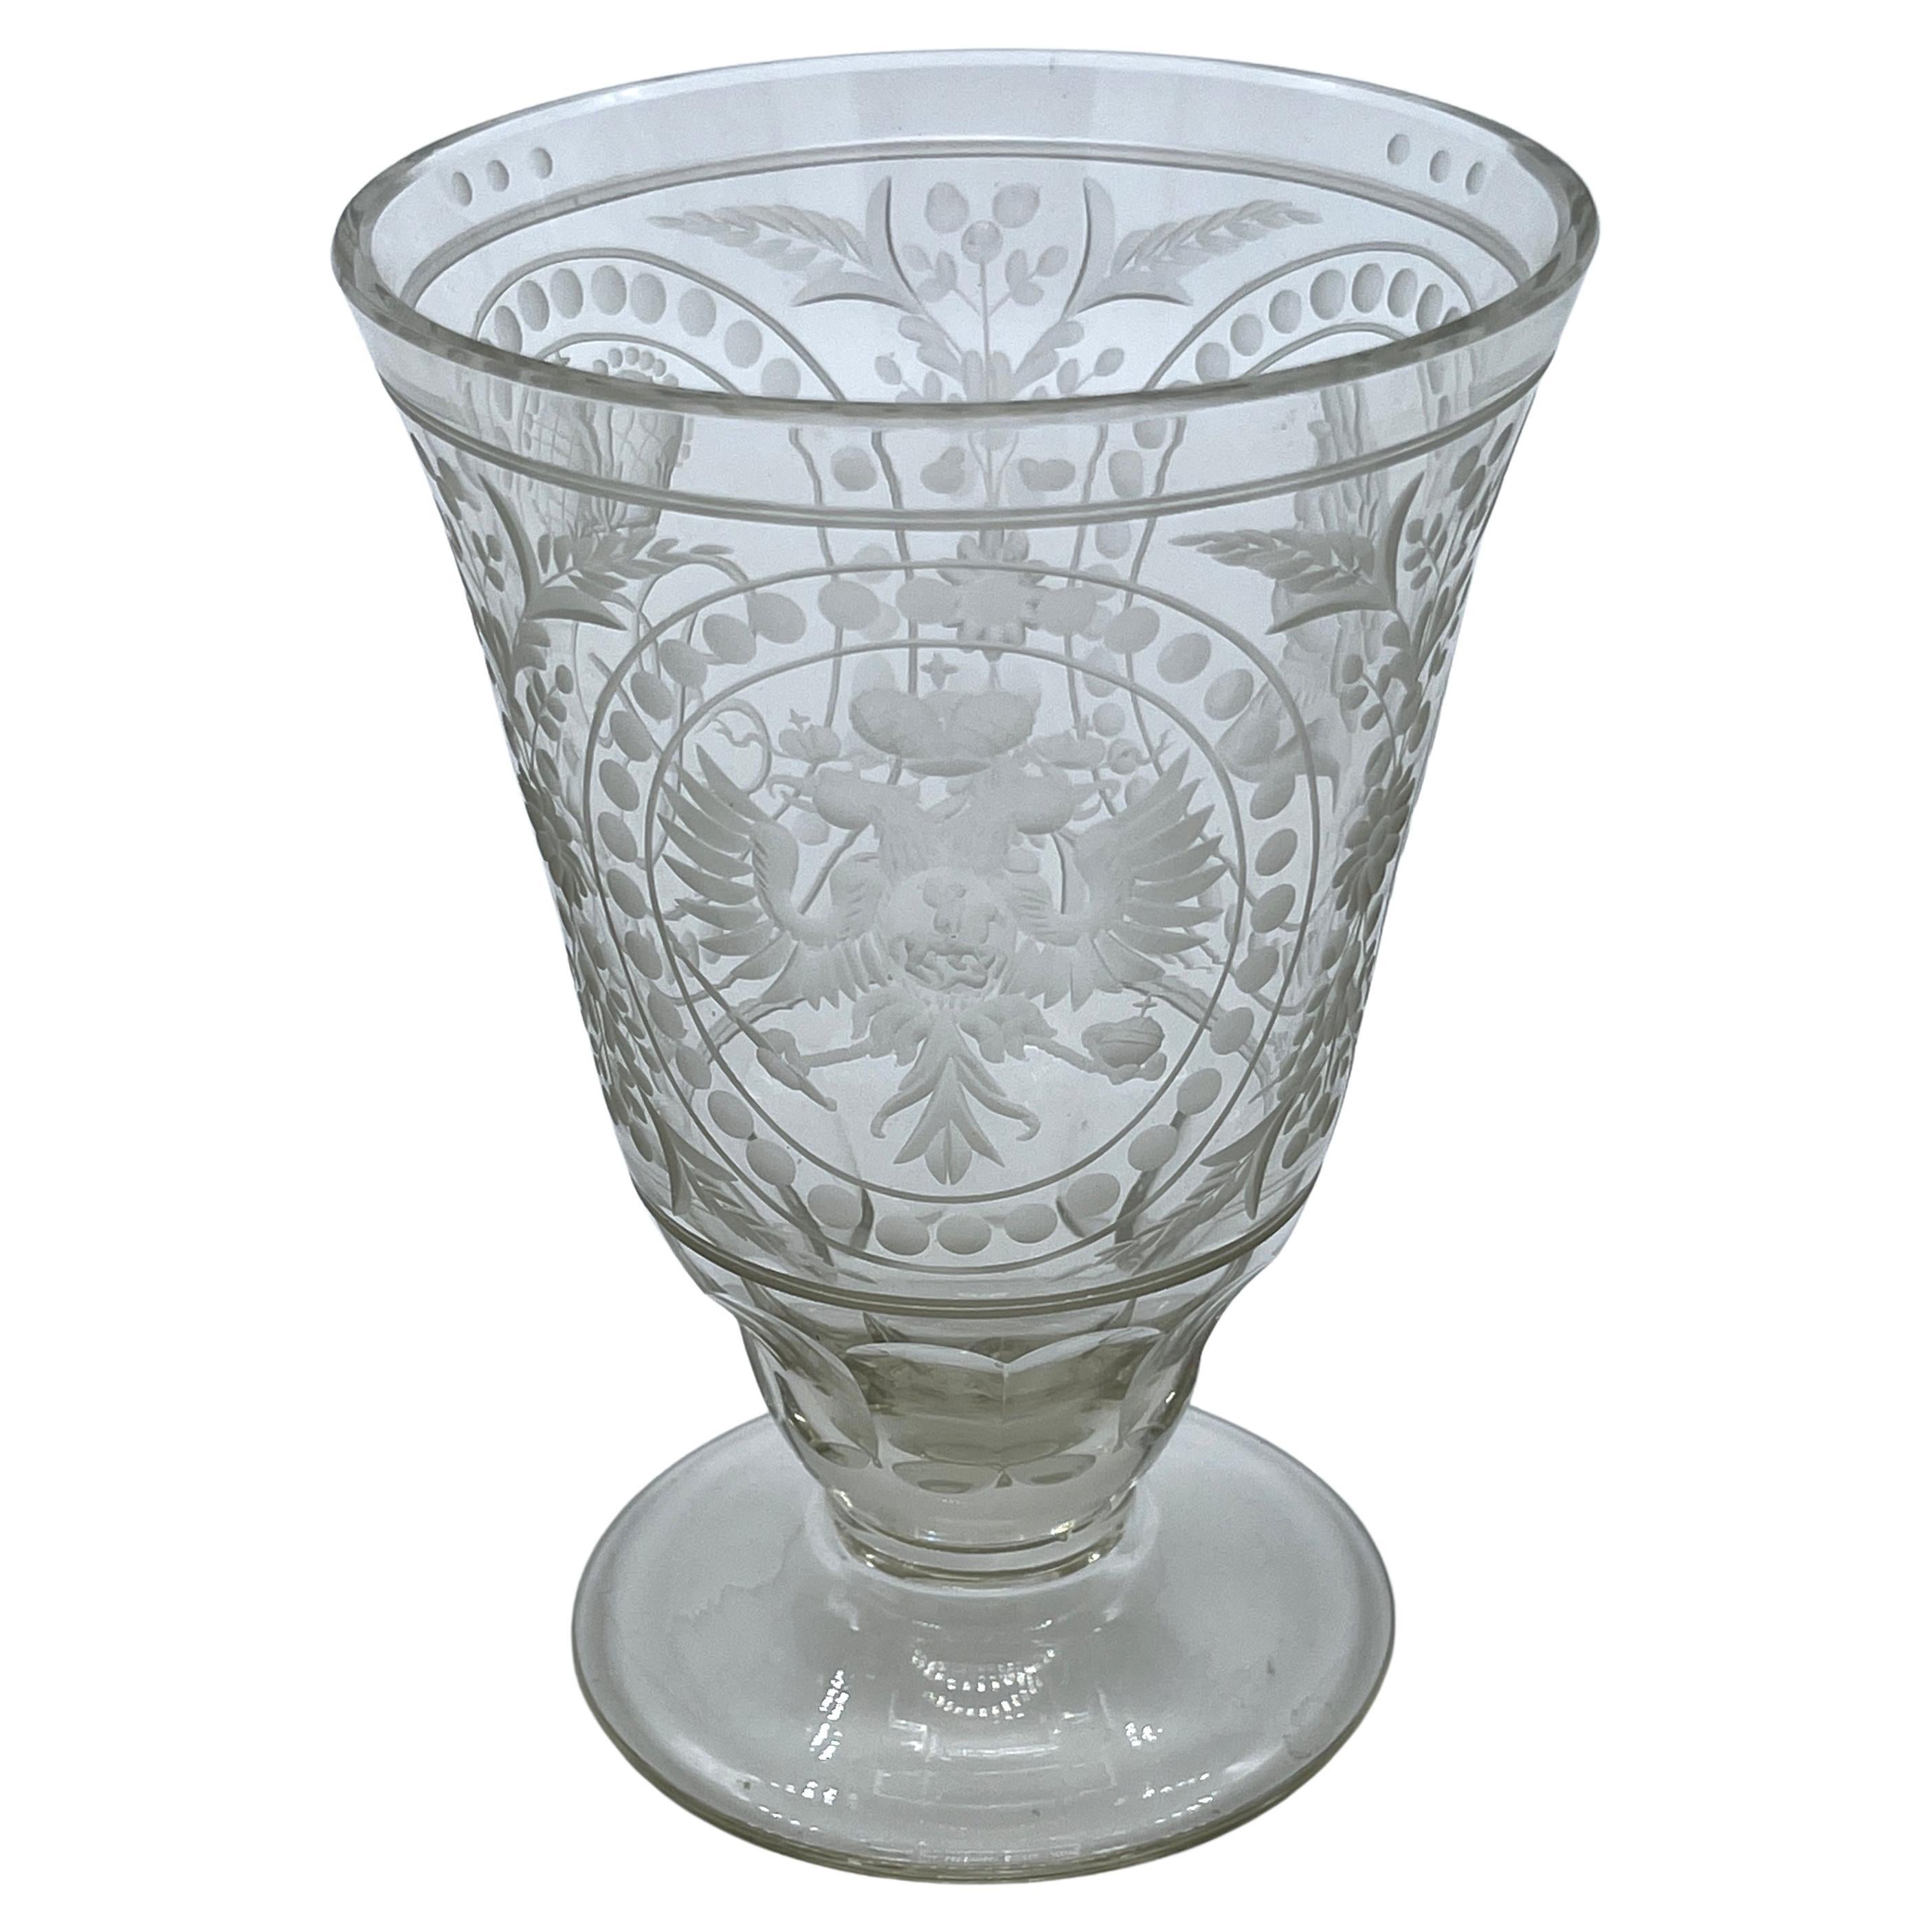 Russian Engraved Crystal Beaker, Commemorative of Alexander I, "The Blessed" For Sale